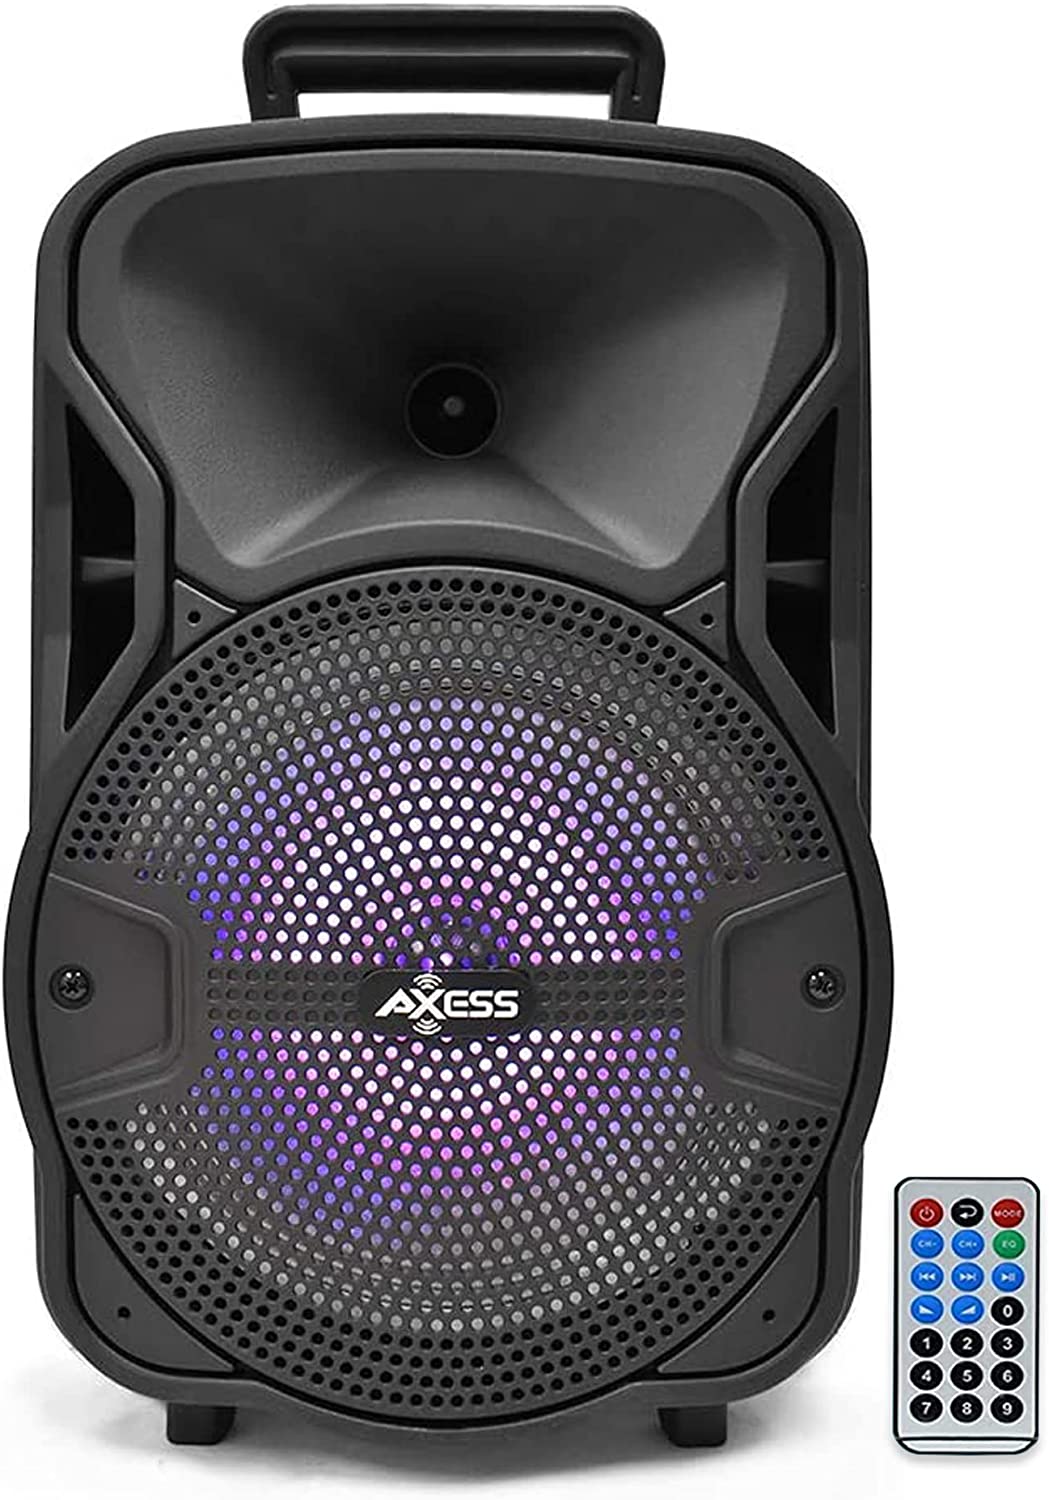 ''Axess Portable Wireless Bluetooth SPEAKER ? 8'''' Woofer & 1.5'''' Tweeter ? Boombox with Built-in LED 